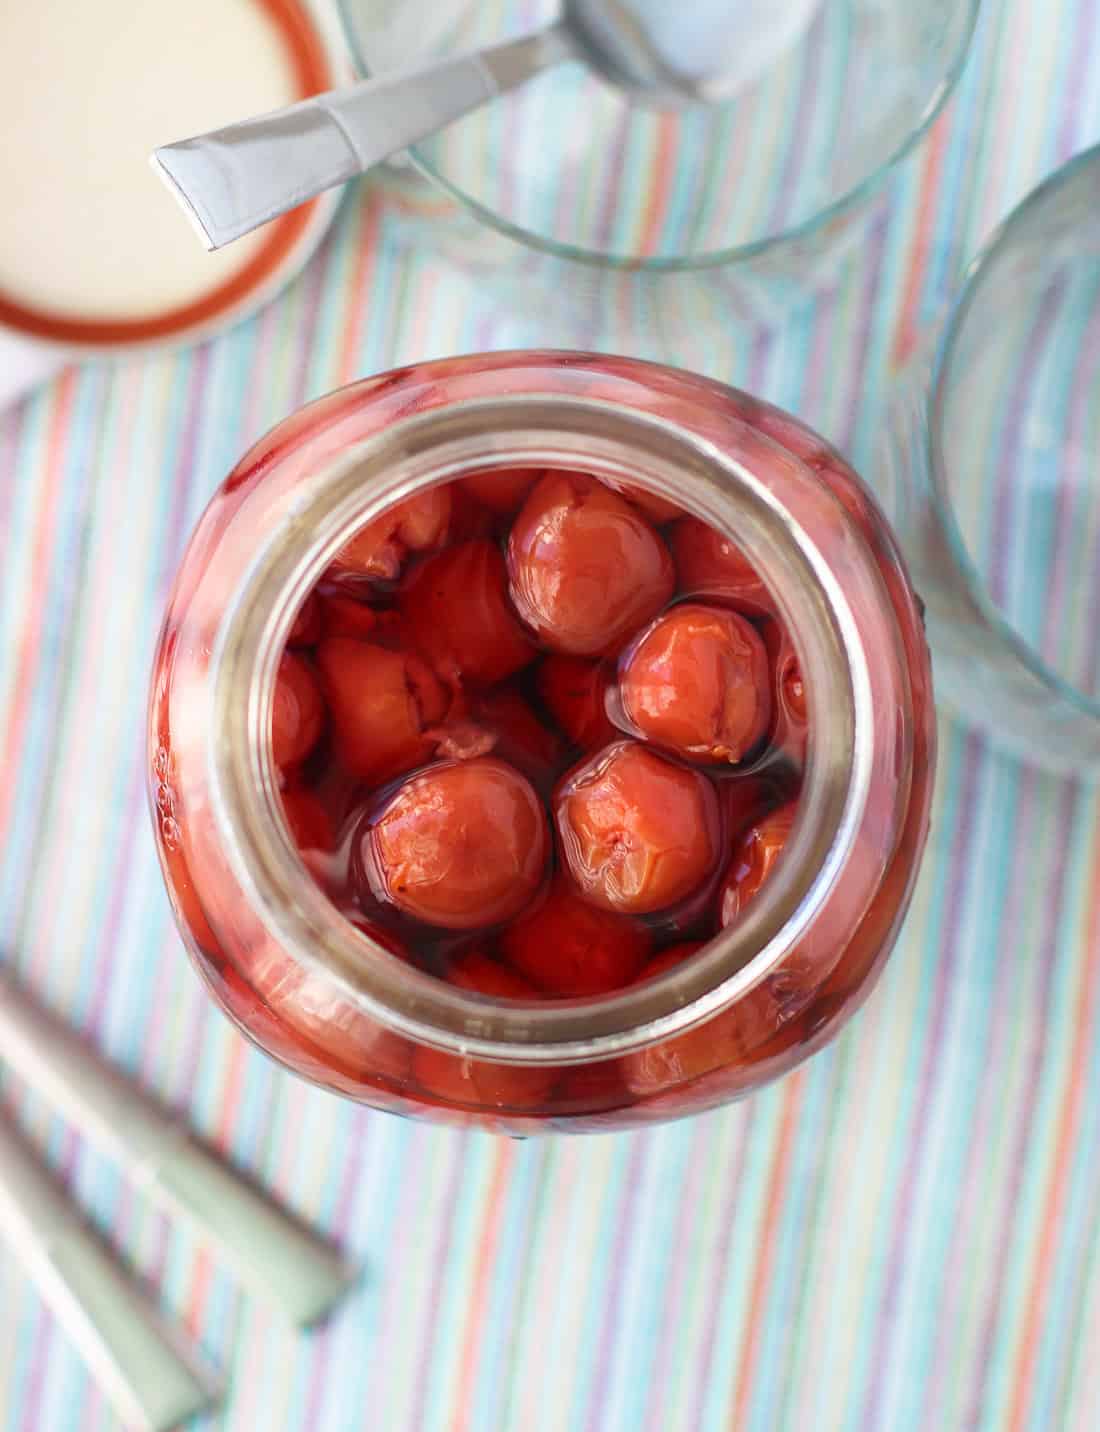 An overhead shot of a large glass jar of homemade maraschino cherries next to an empty rocks glass and spoons